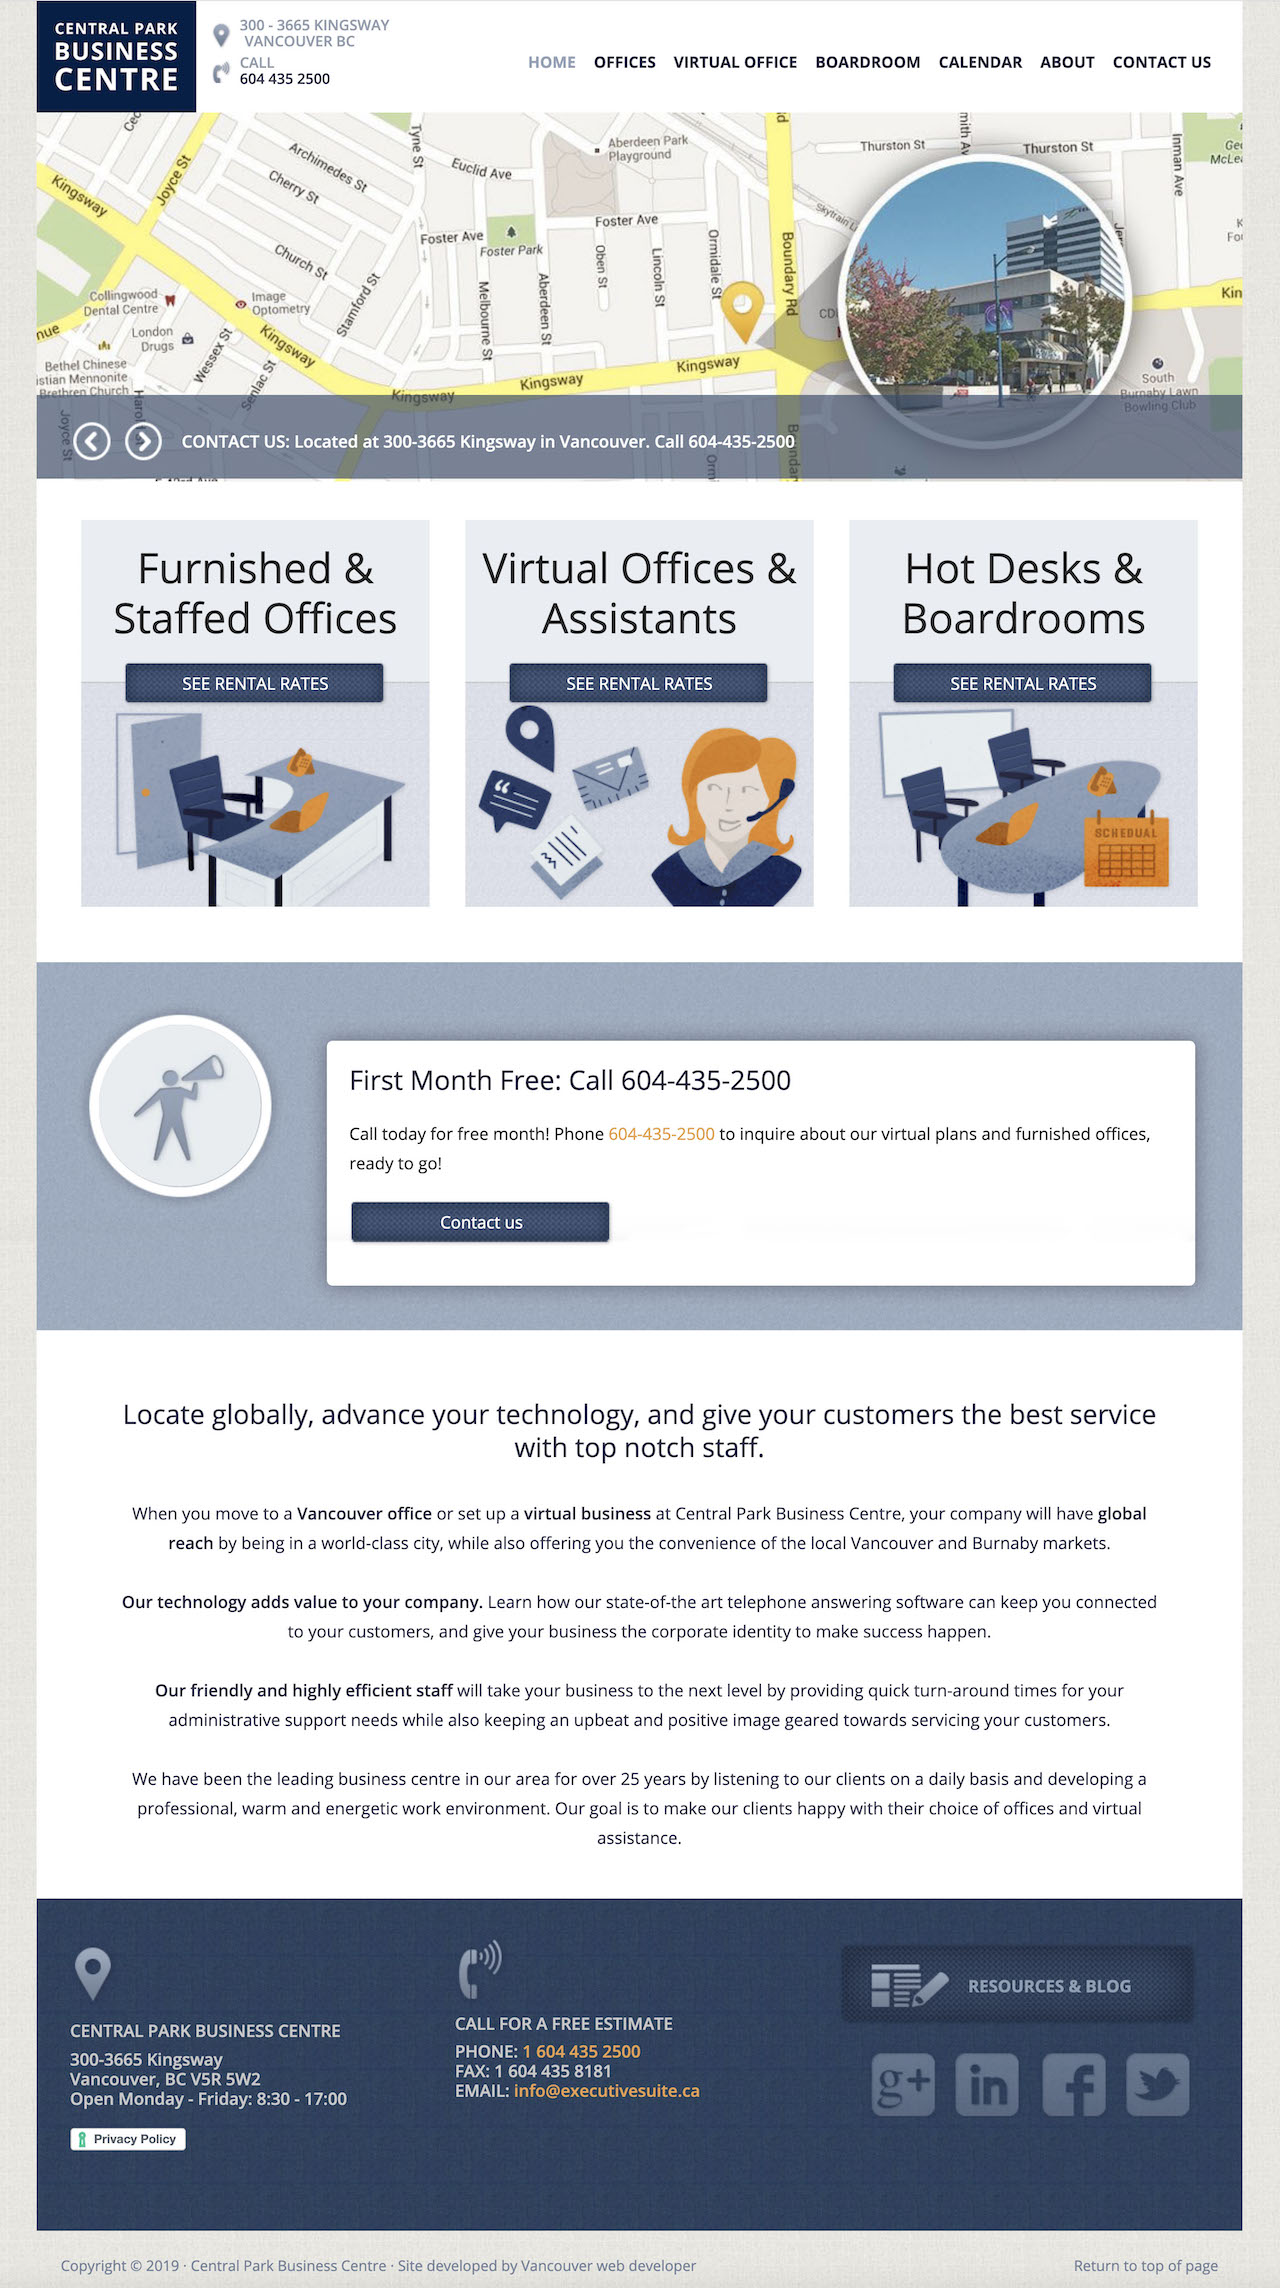 cpbc vancouver business web design for an office center - home page